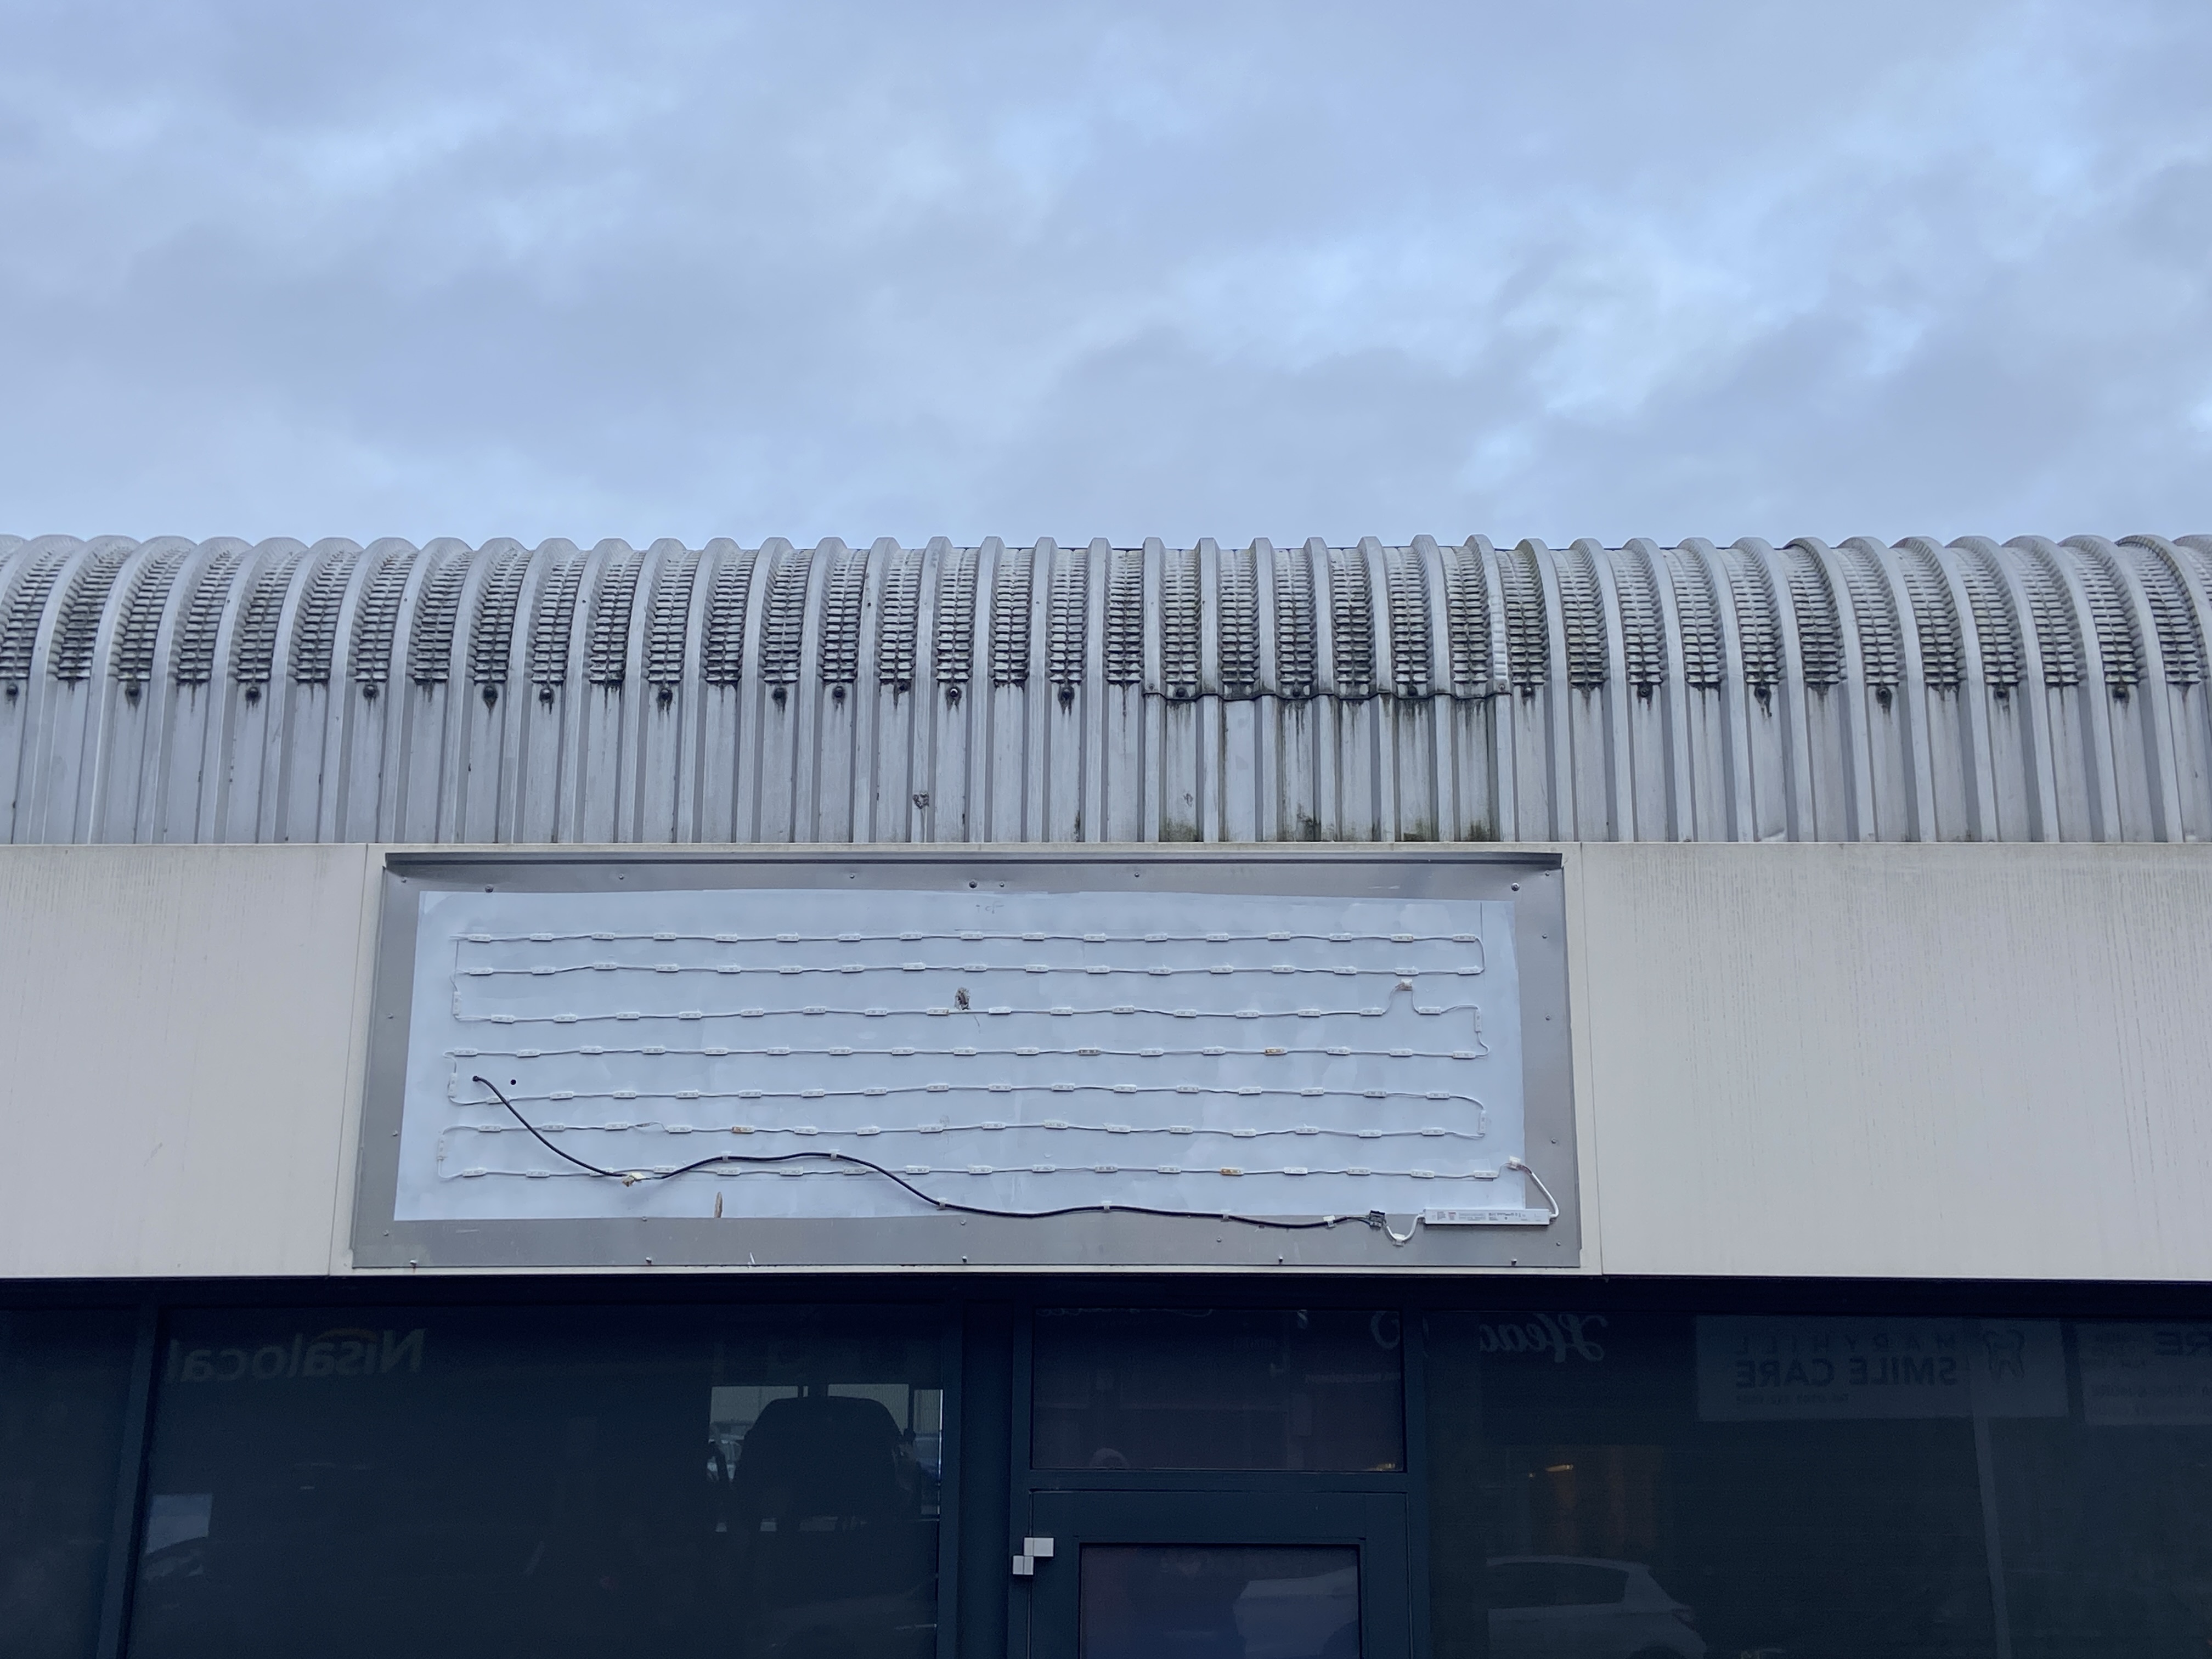 ribbed rounded roof edge against overcast sky. exposed LED impotent signage over dark frontage